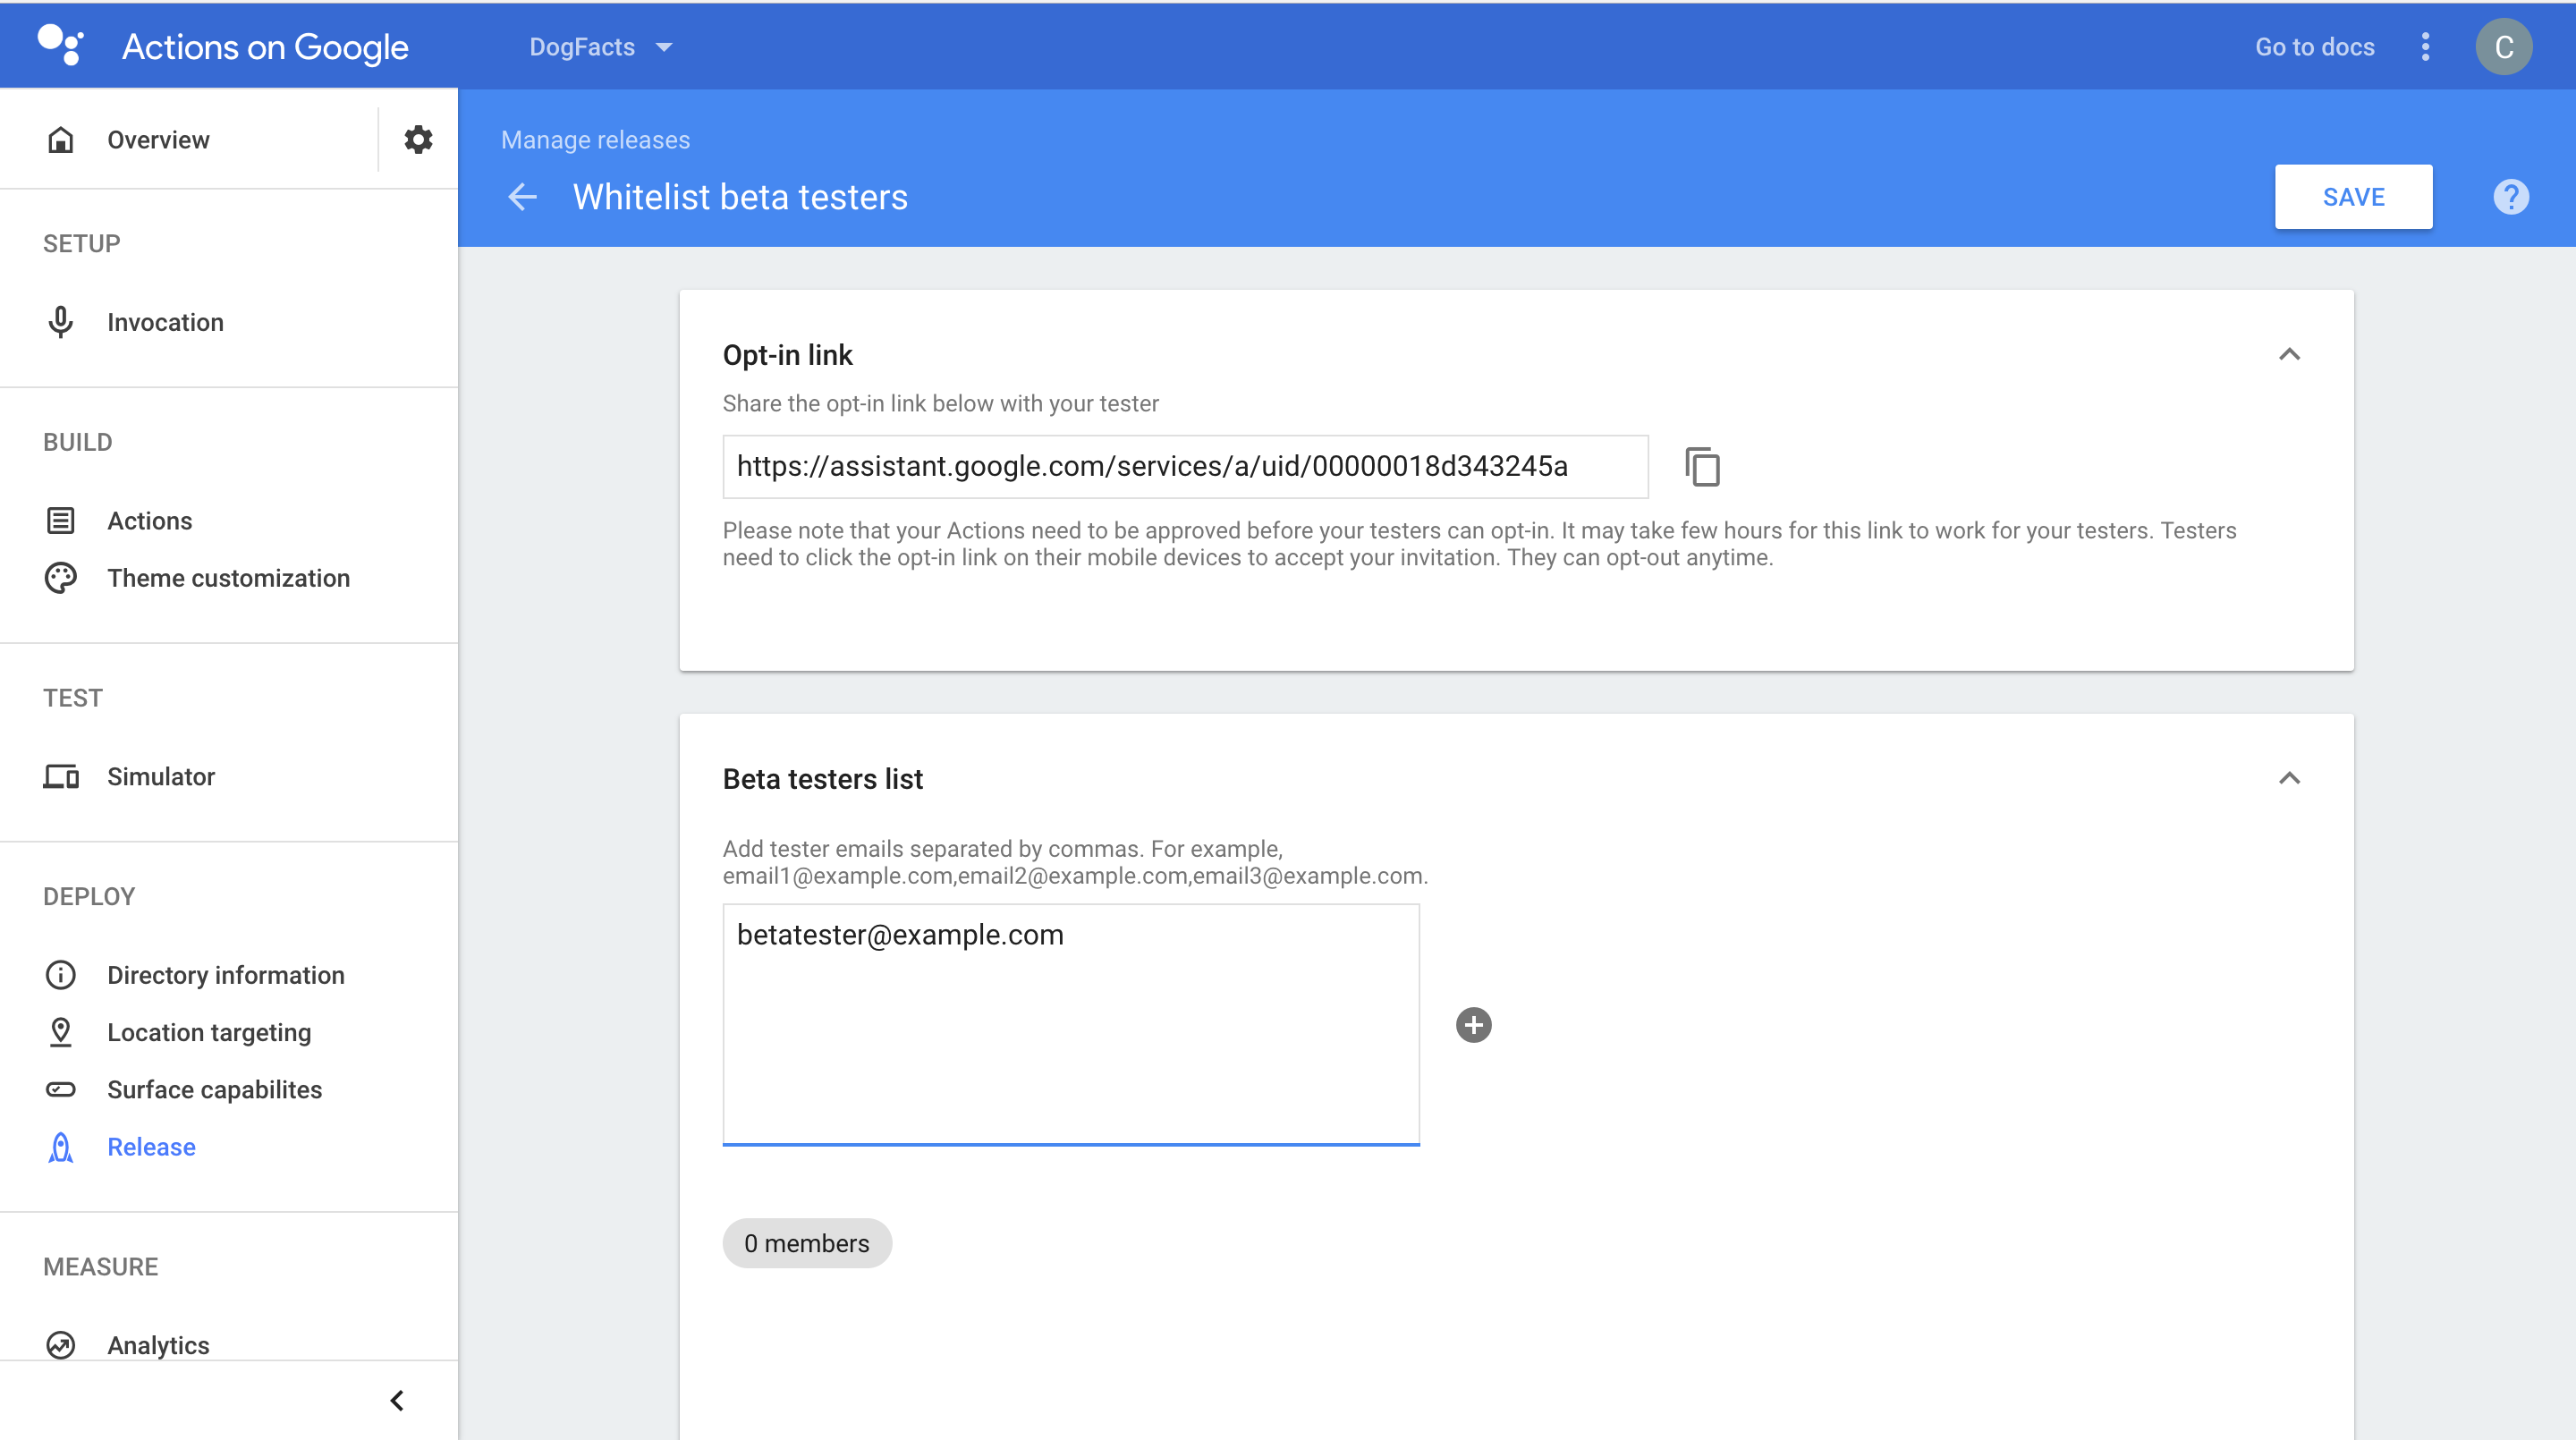 Adding beta testers to Actions on Google